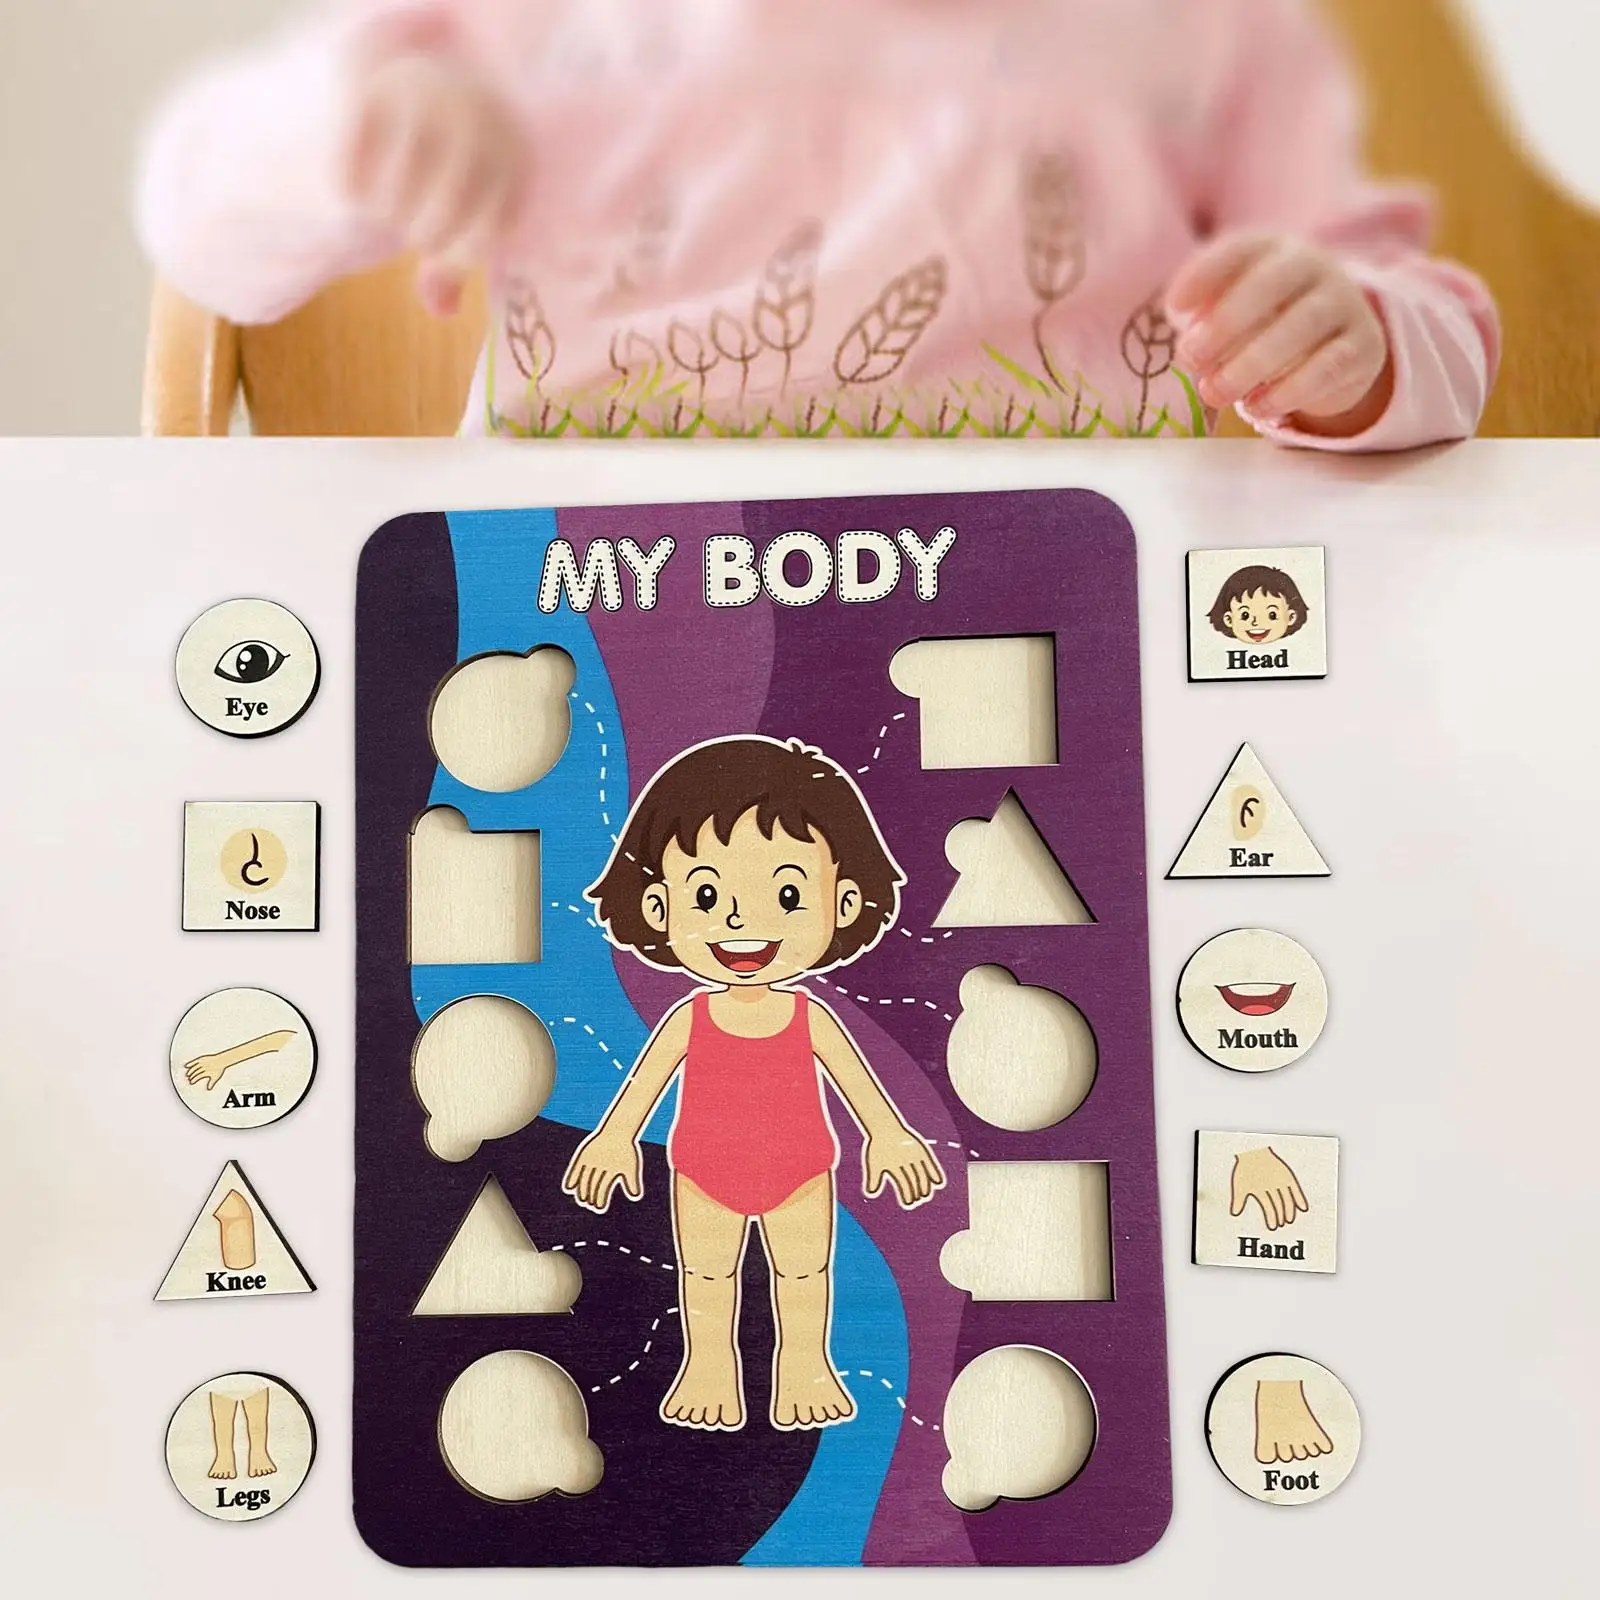 Wooden My Body Puzzle for Toddlers Learning Human Body Parts Wooden Human puzzles for Toddlers